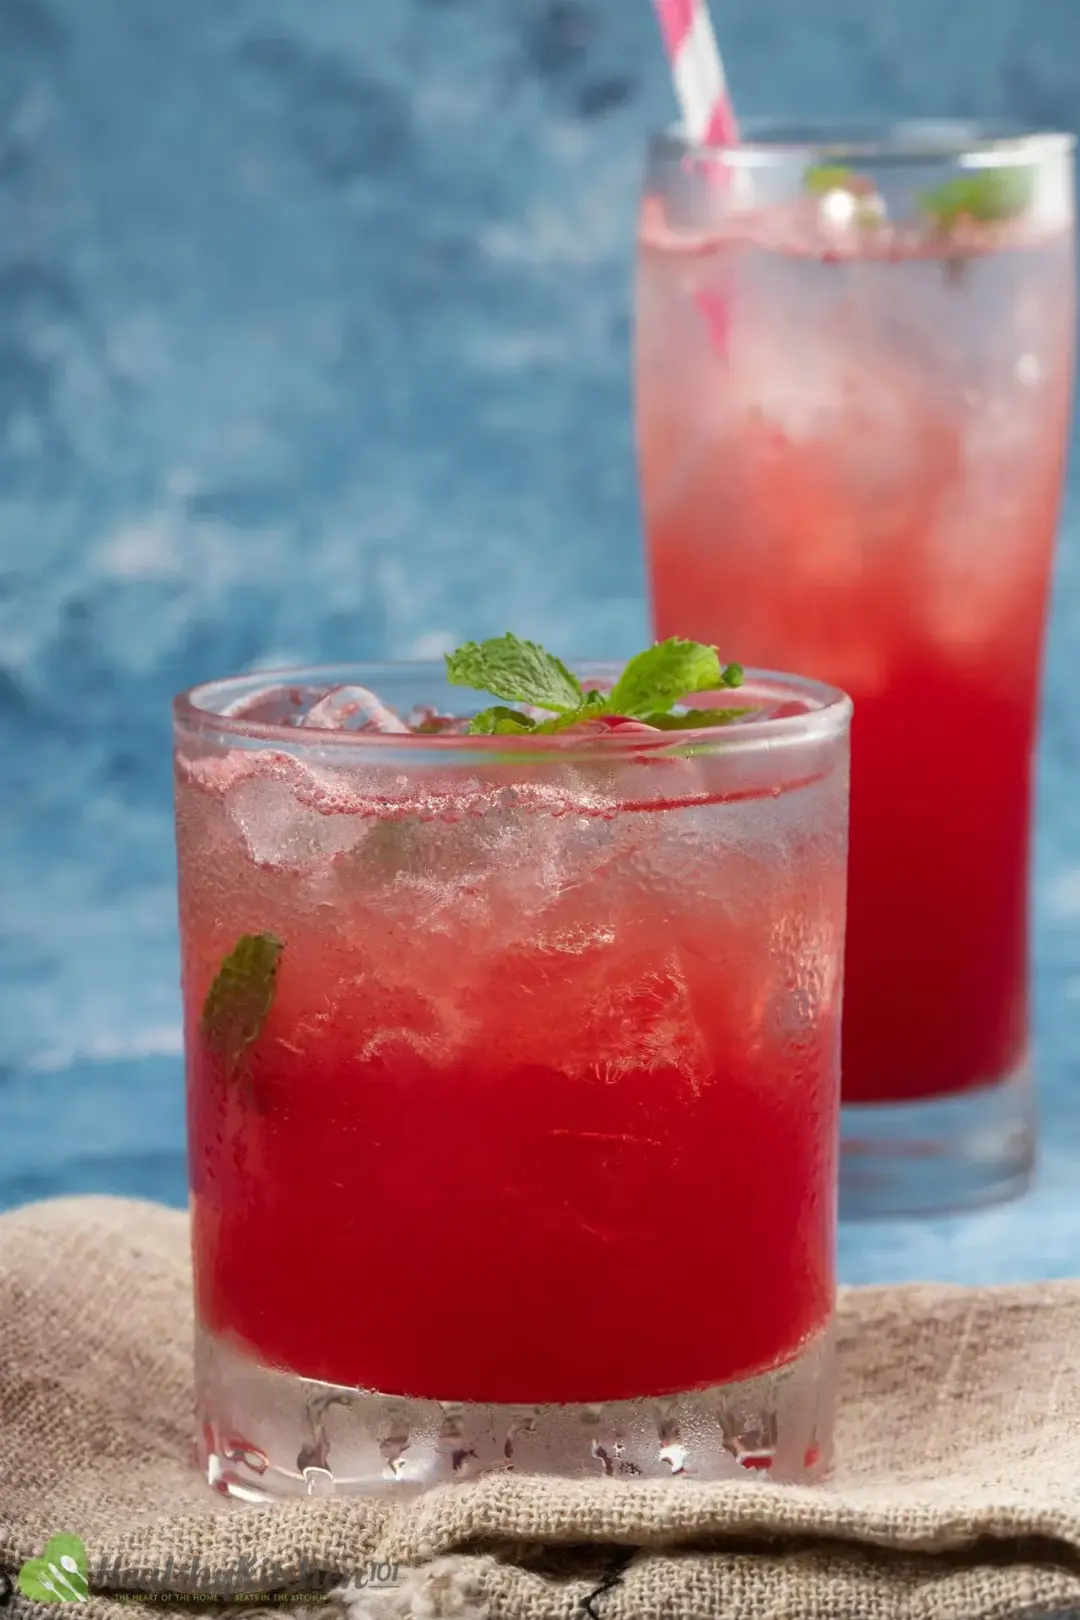 A small and round glass of watermelon juice filled with ice and garnished with several mint leaves